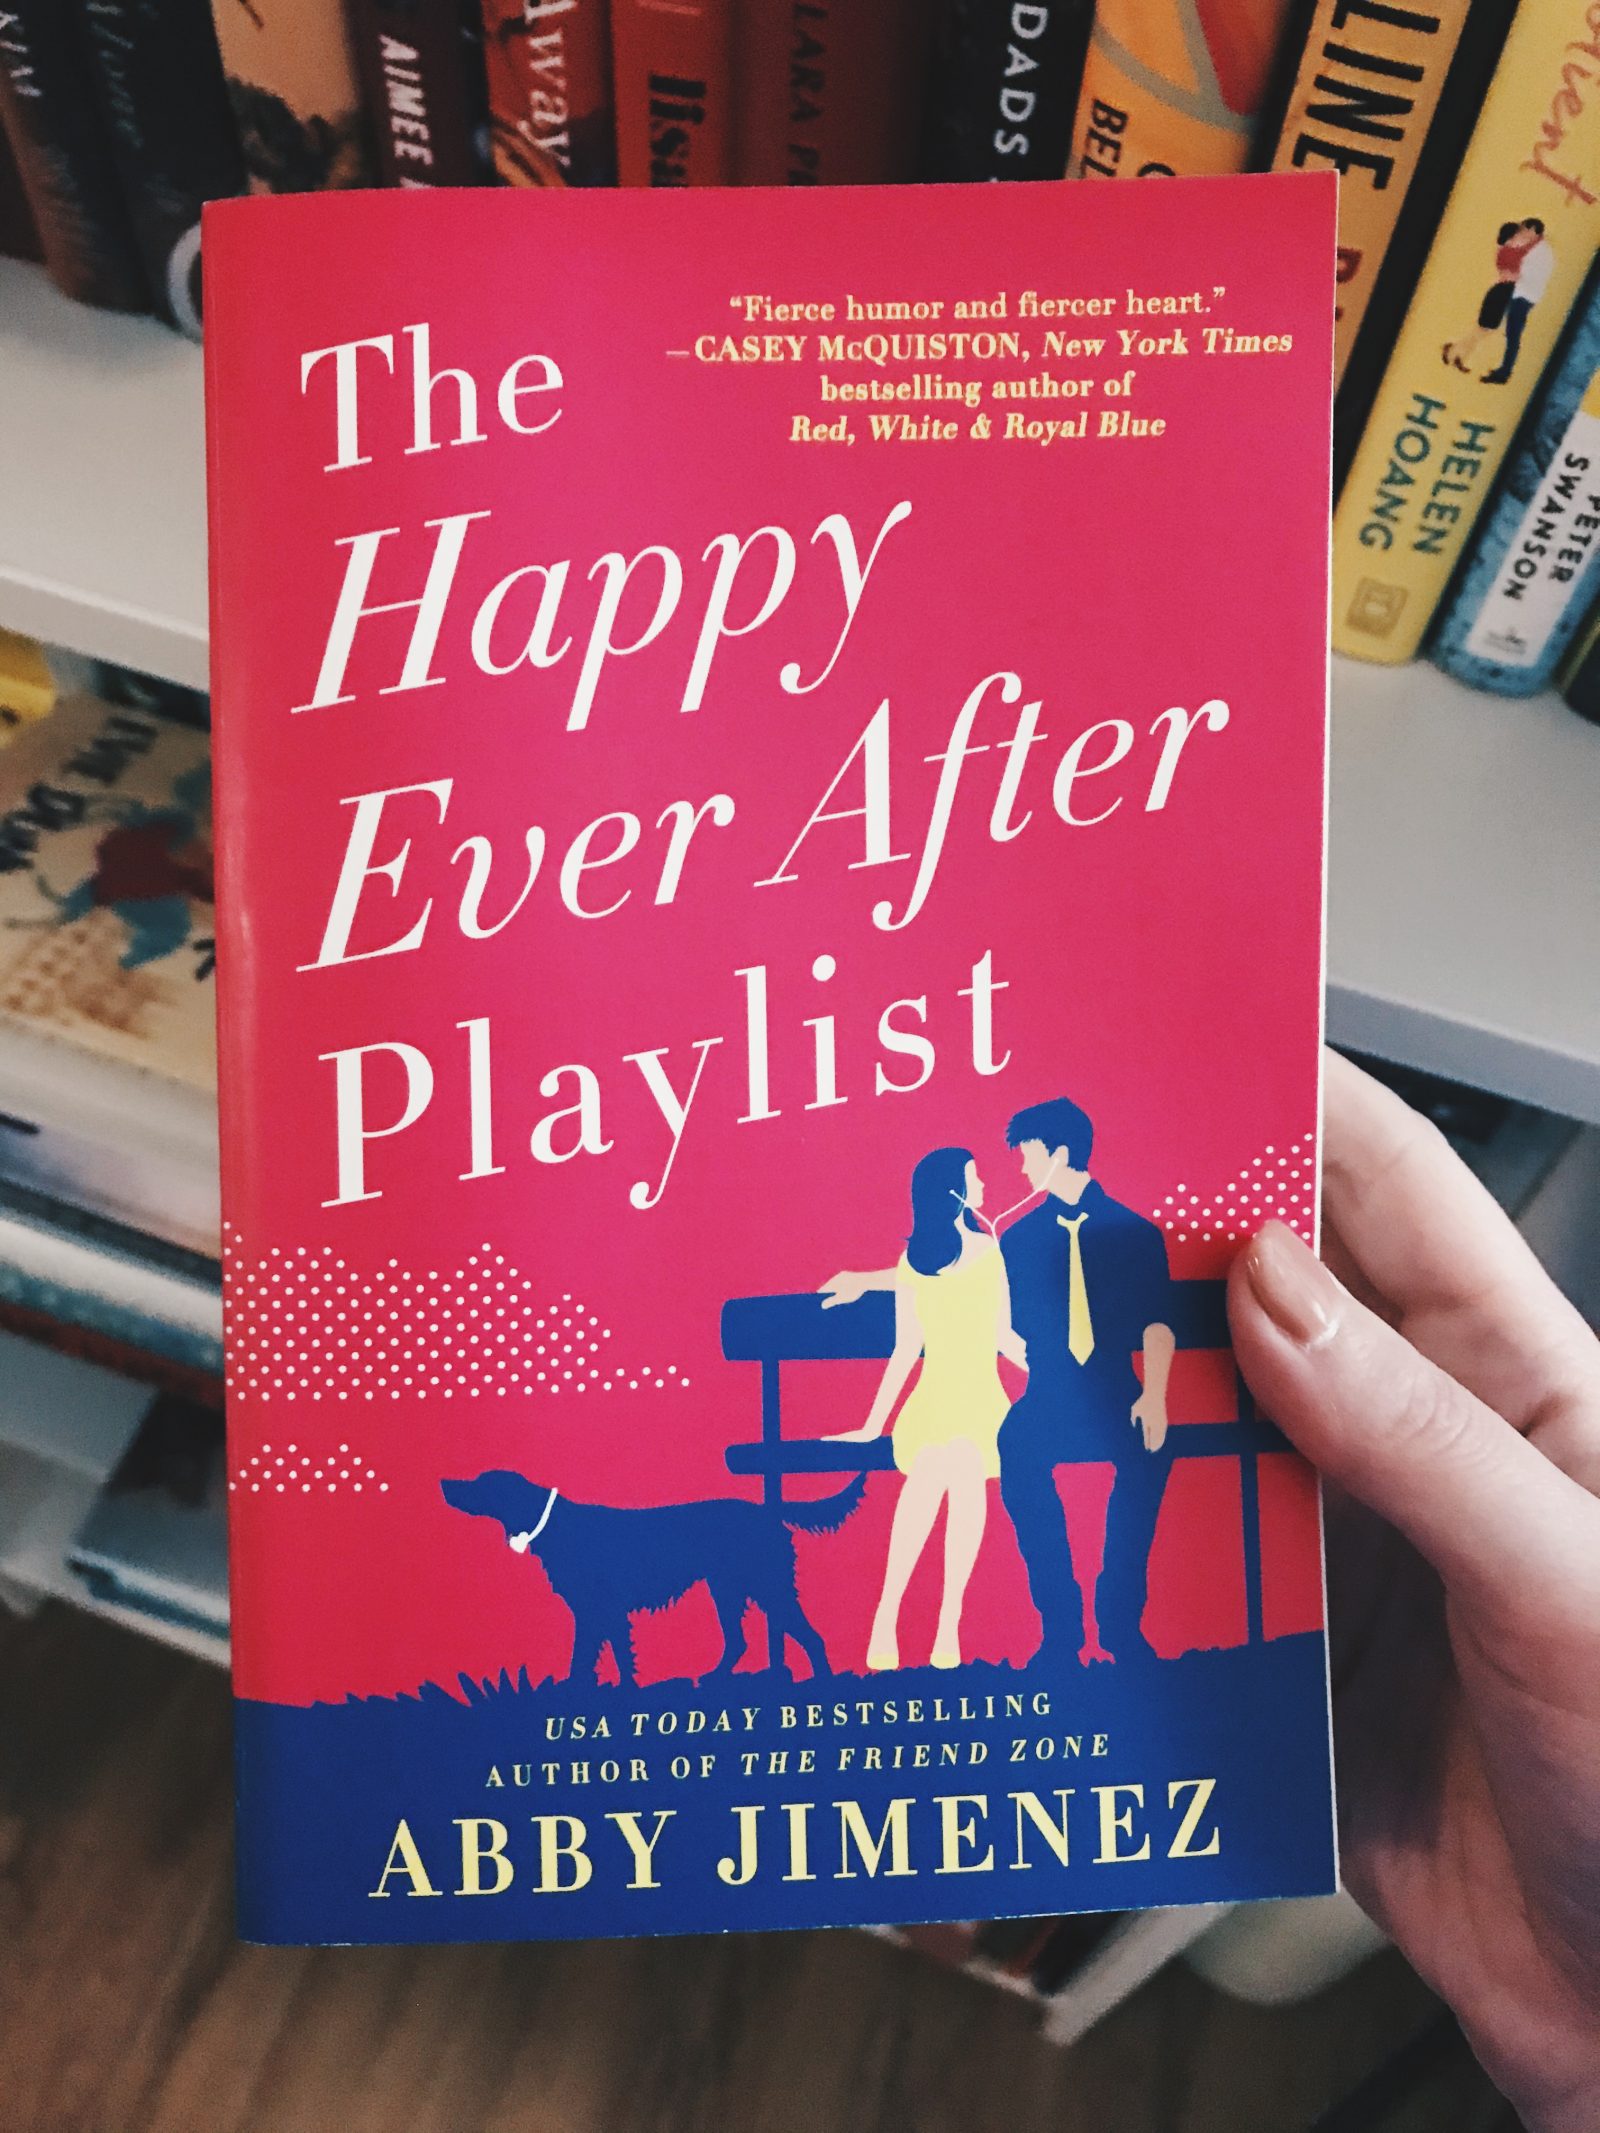 the happy ever after playlist book